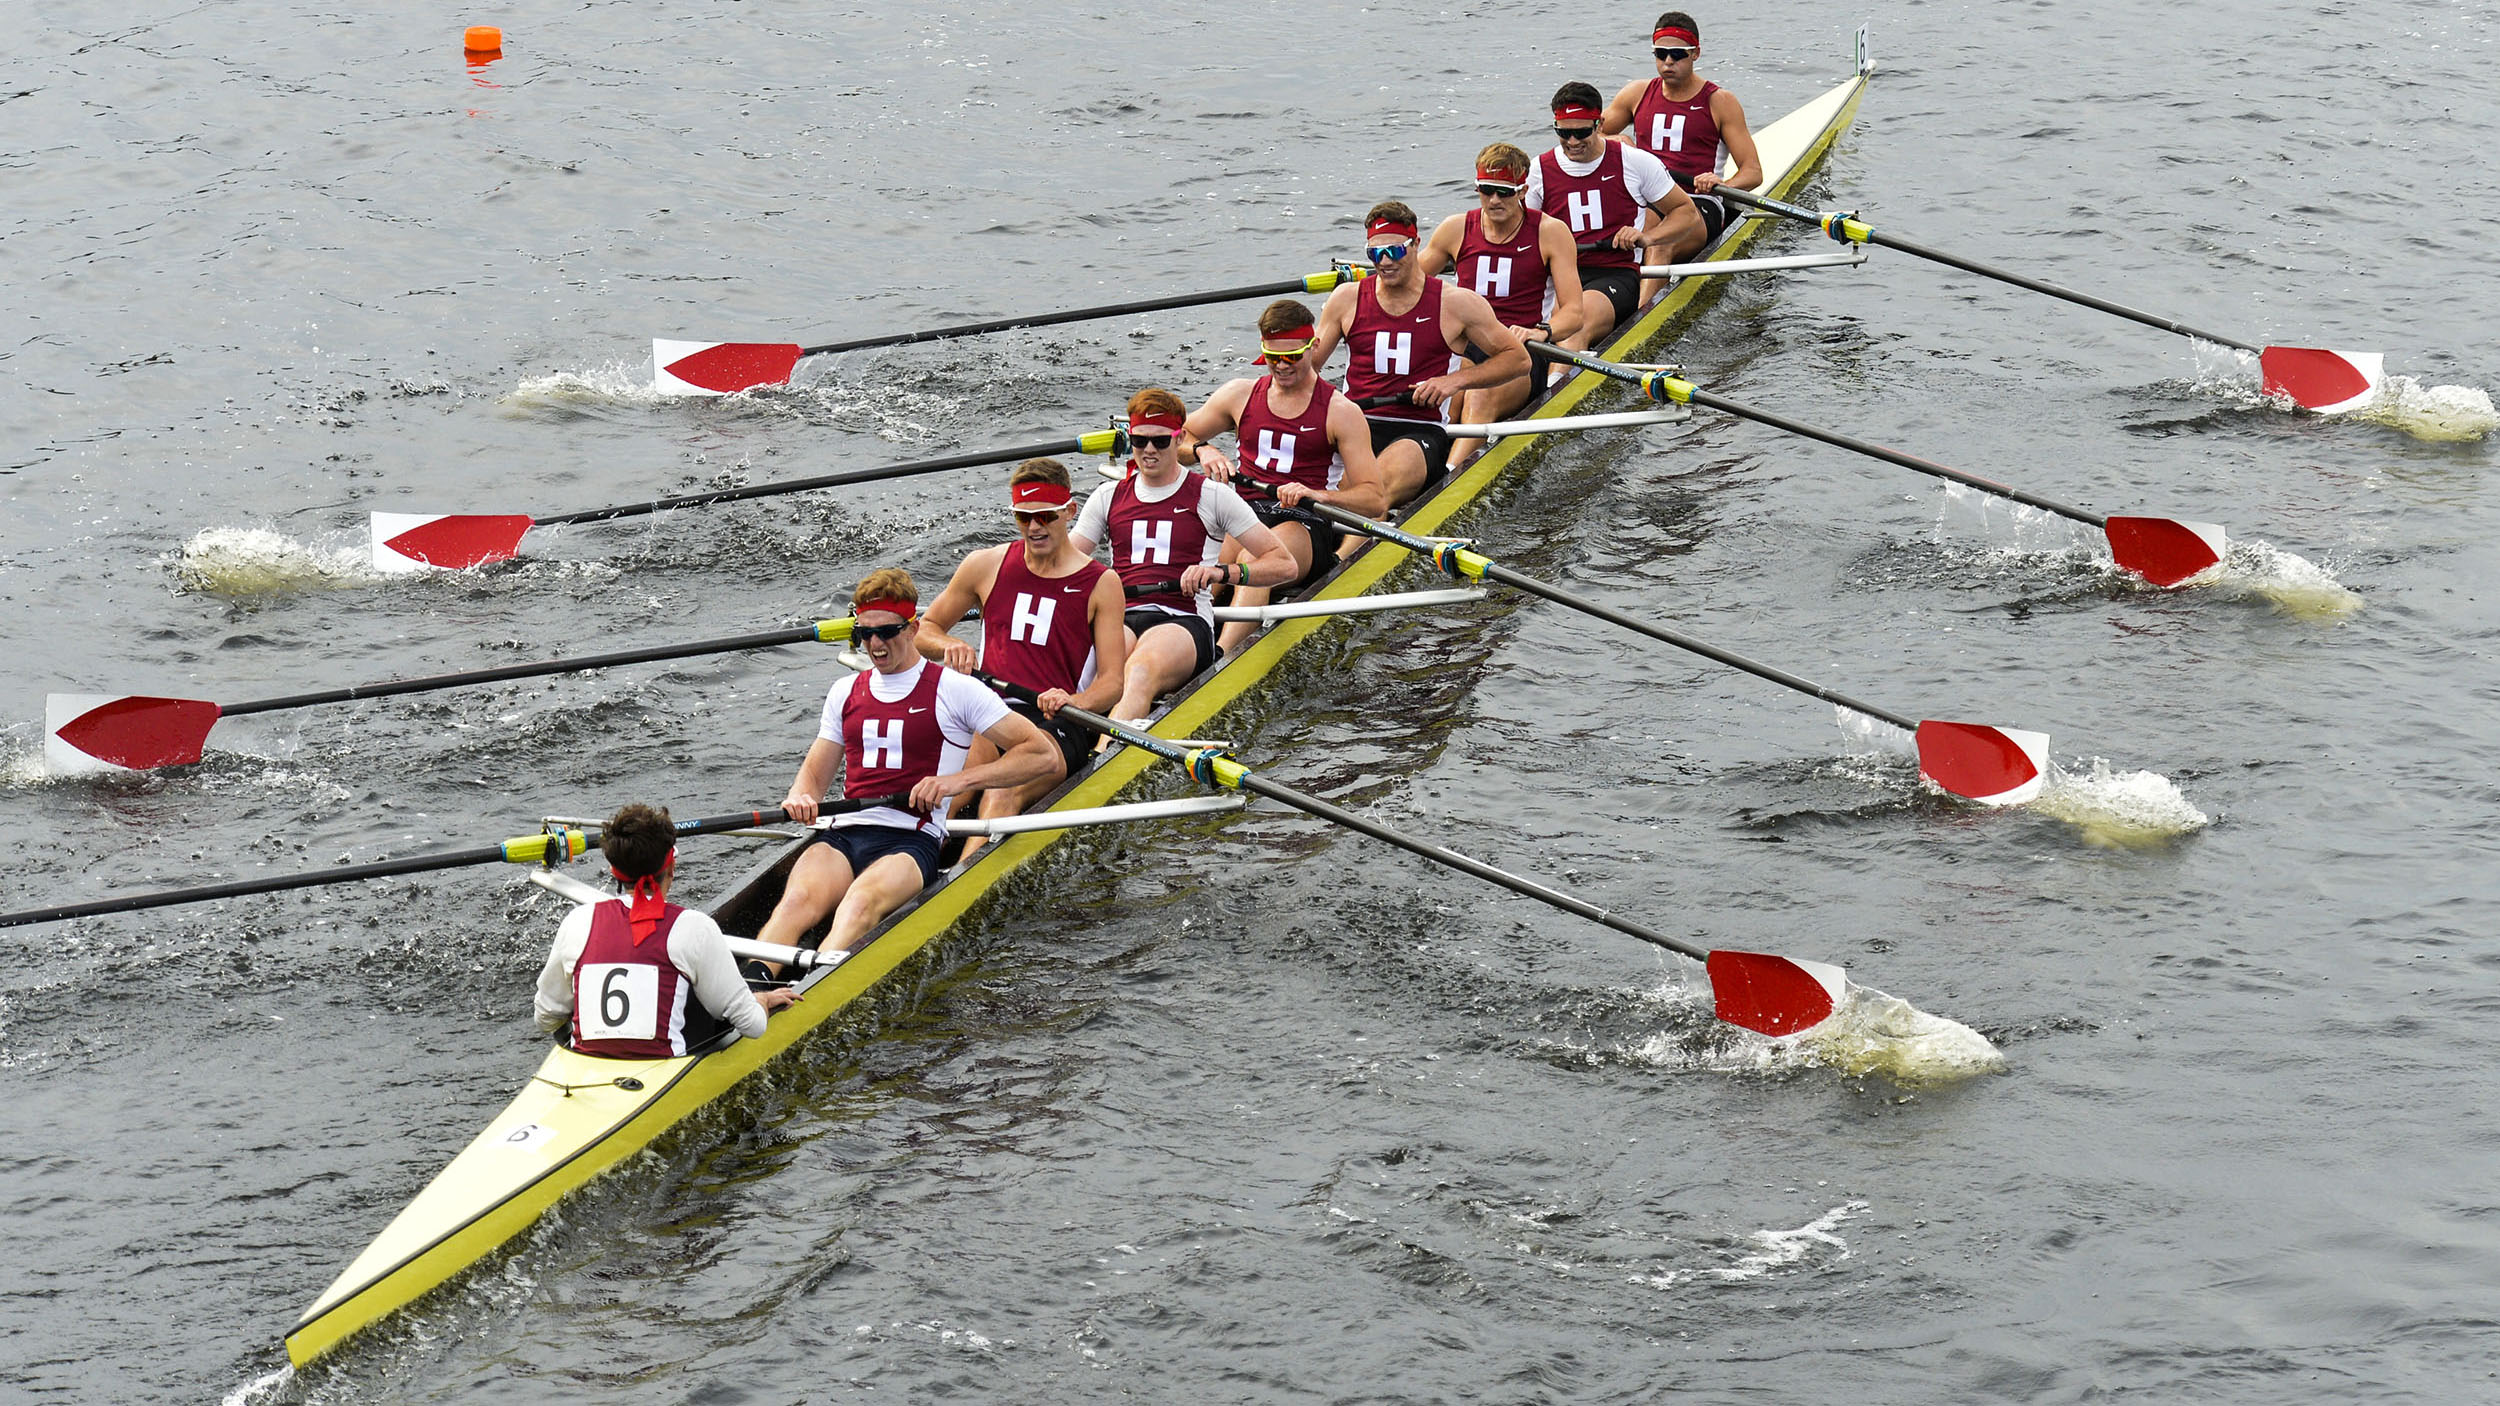 Harvard’s heavyweight boat passes beneath the Weeks Footbridge in the men’s championship eights race during the Head of the Charles.